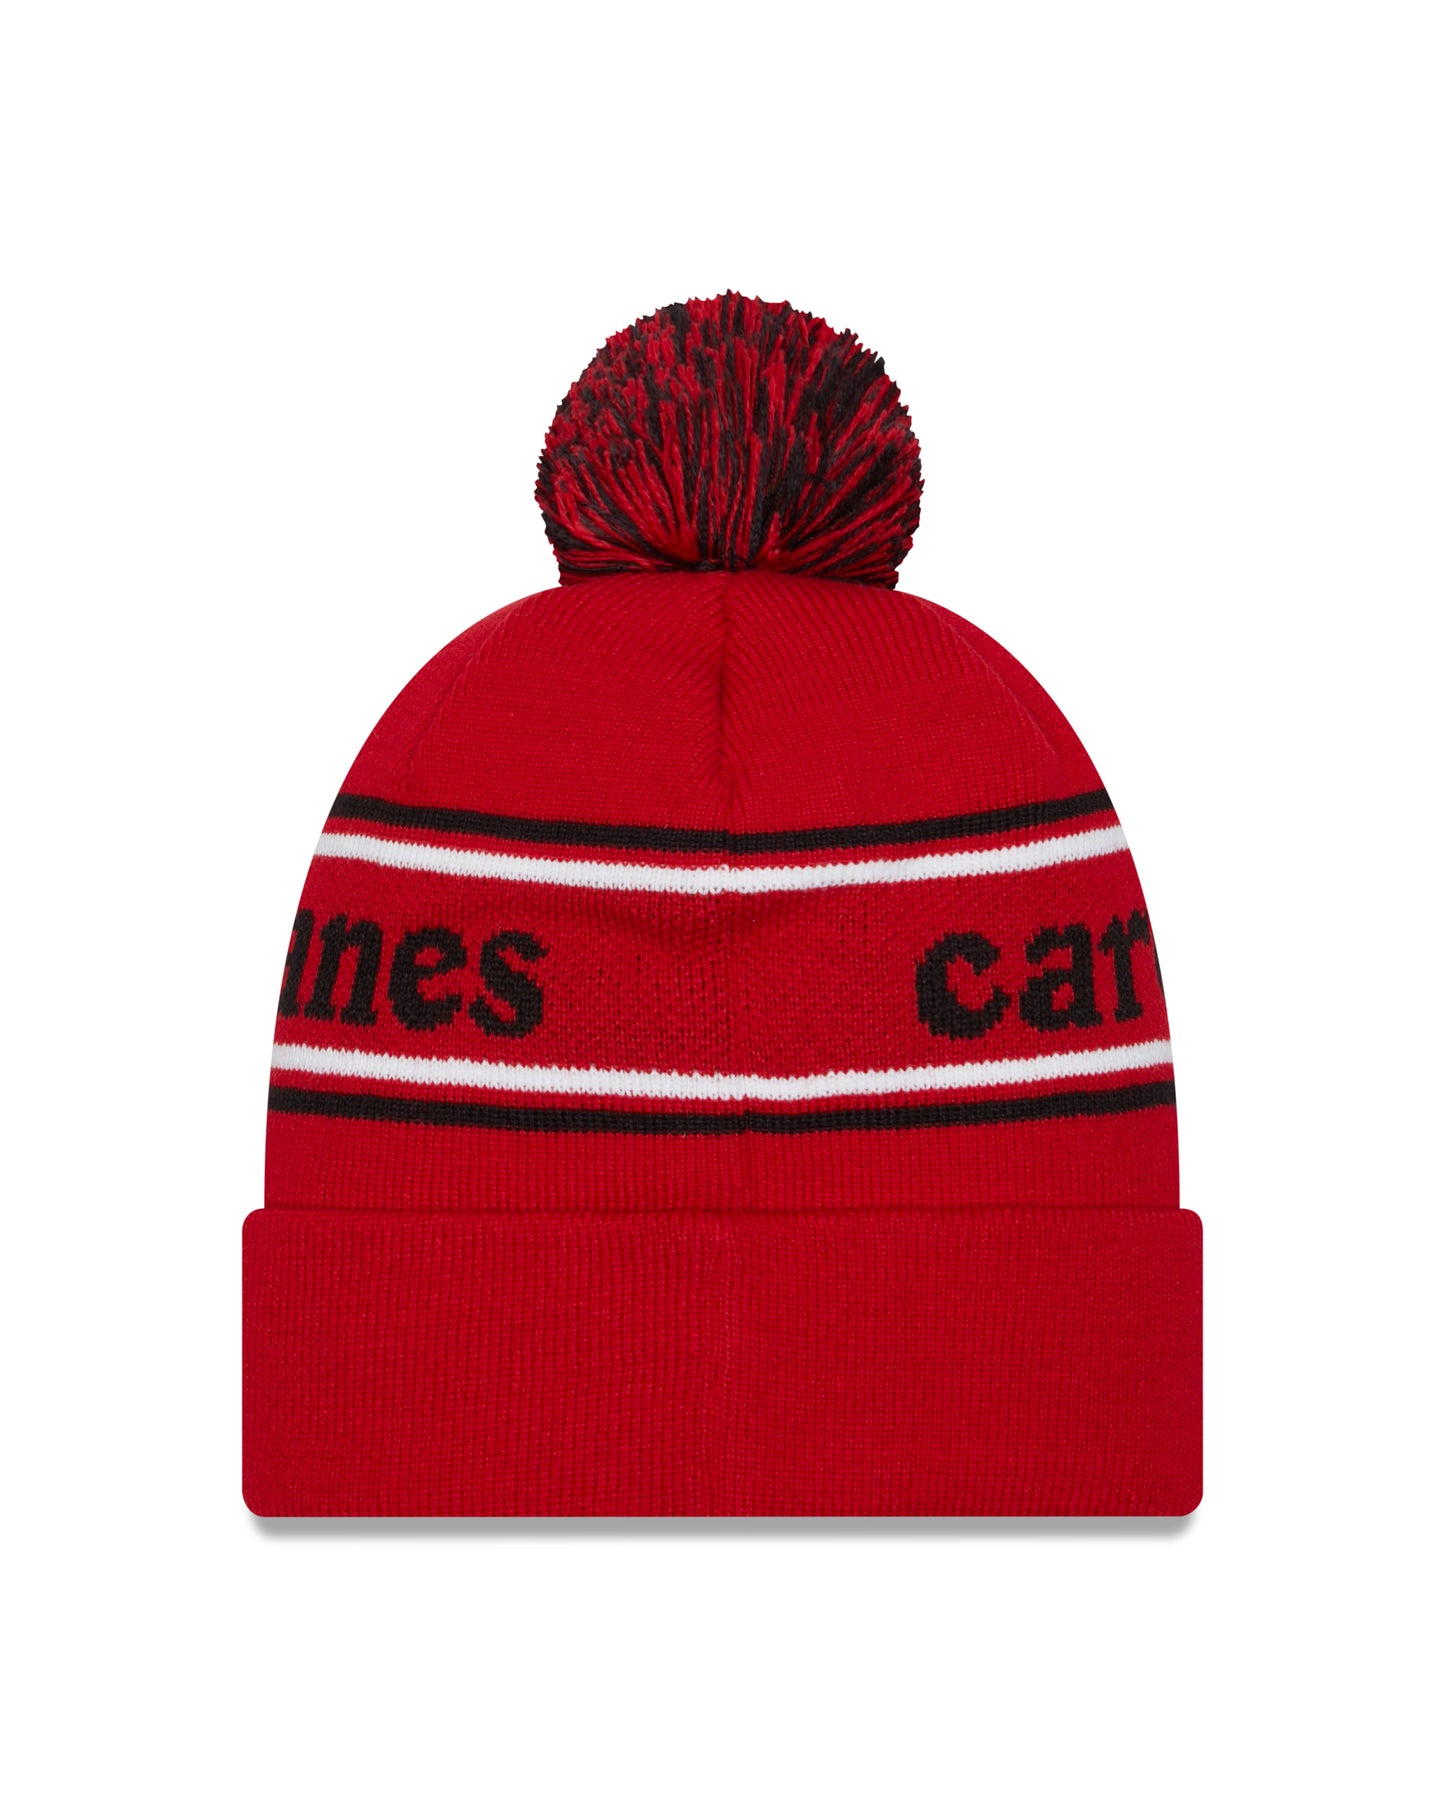 New Era Marquee Red Knit